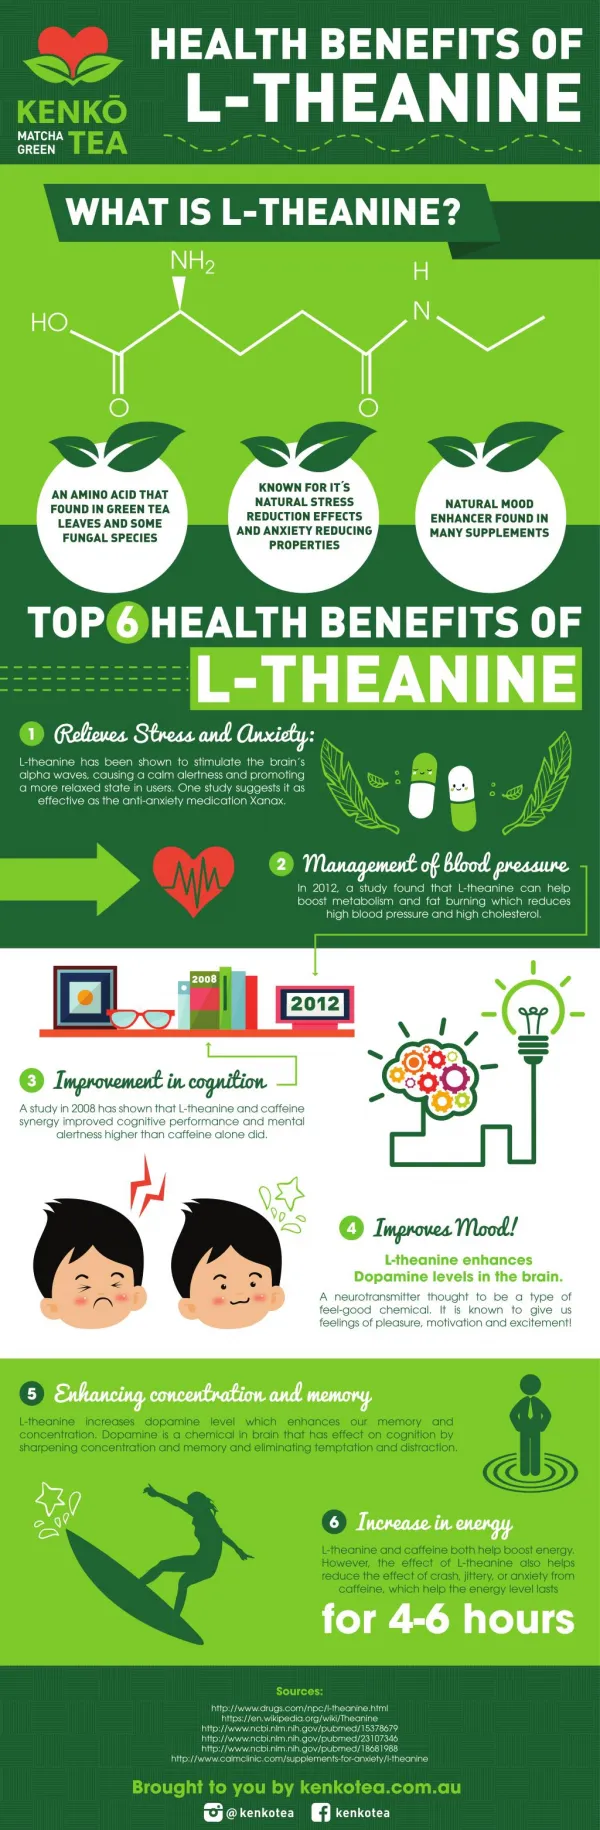 Health benefits of the synergy of L-theanine | KenkoTea - See more at: http://visual.ly/health-benefits-synergy-l-theani